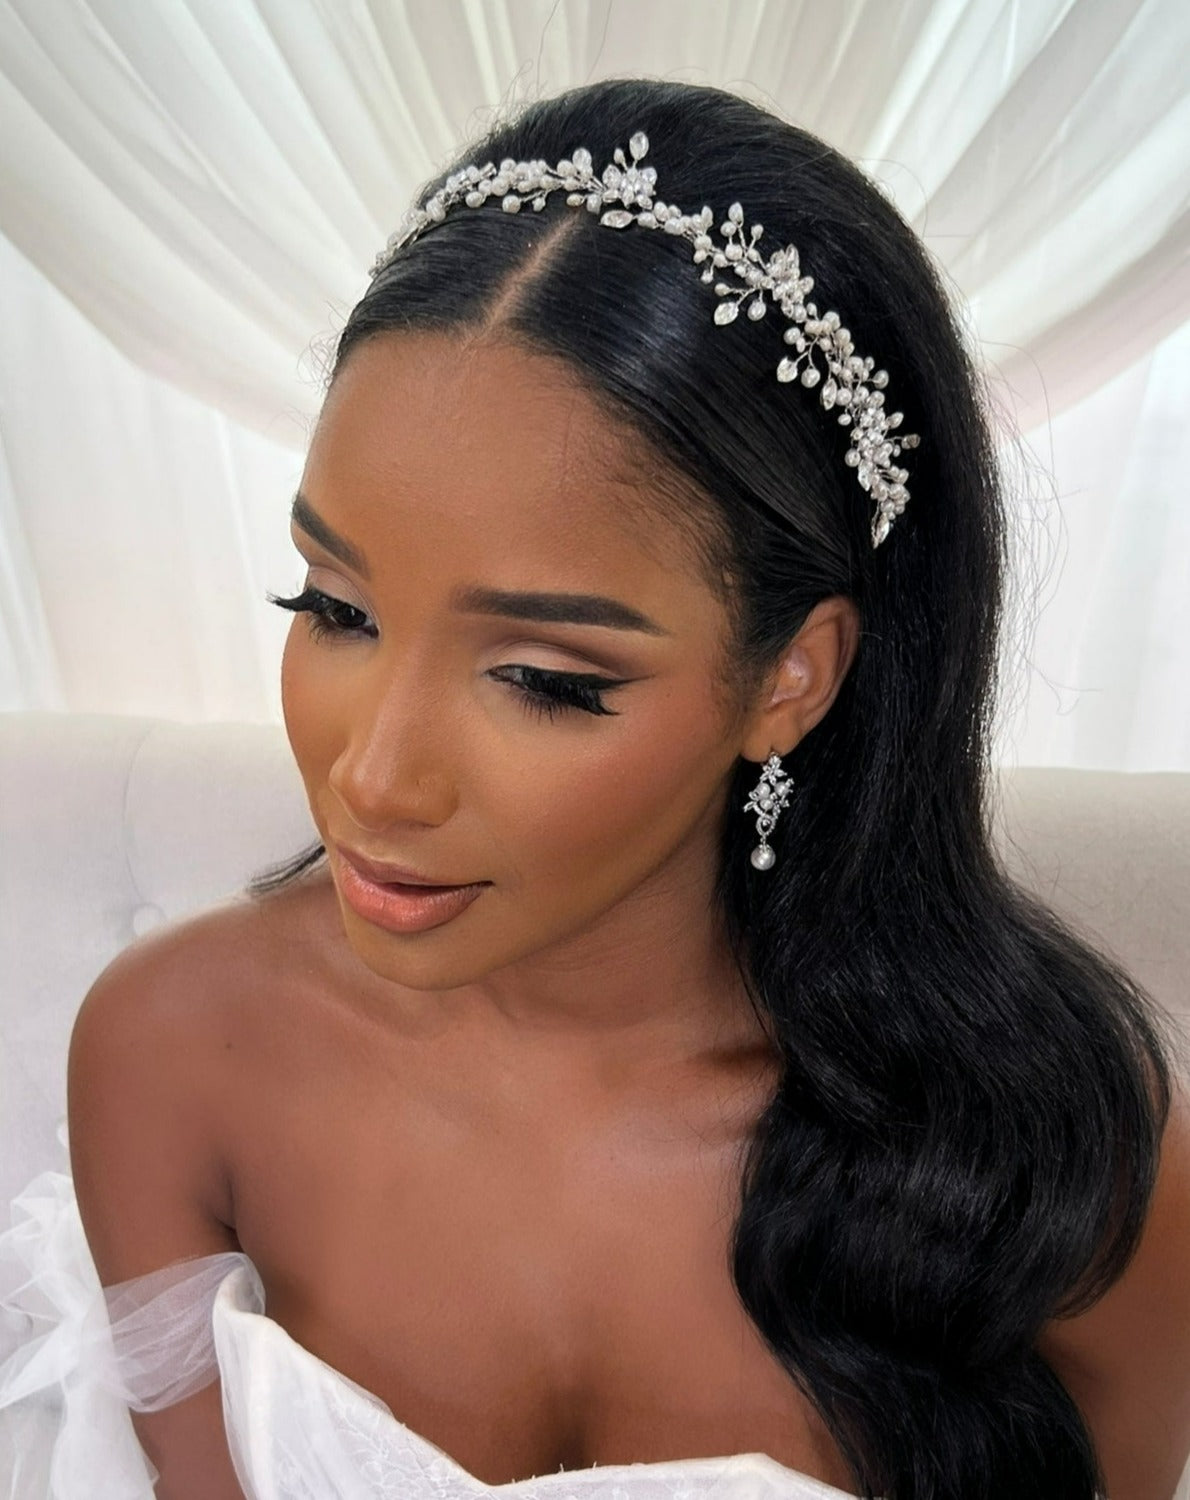 female model wearing bridal hair vine with varying pearls, sprigs and flowers of crystal